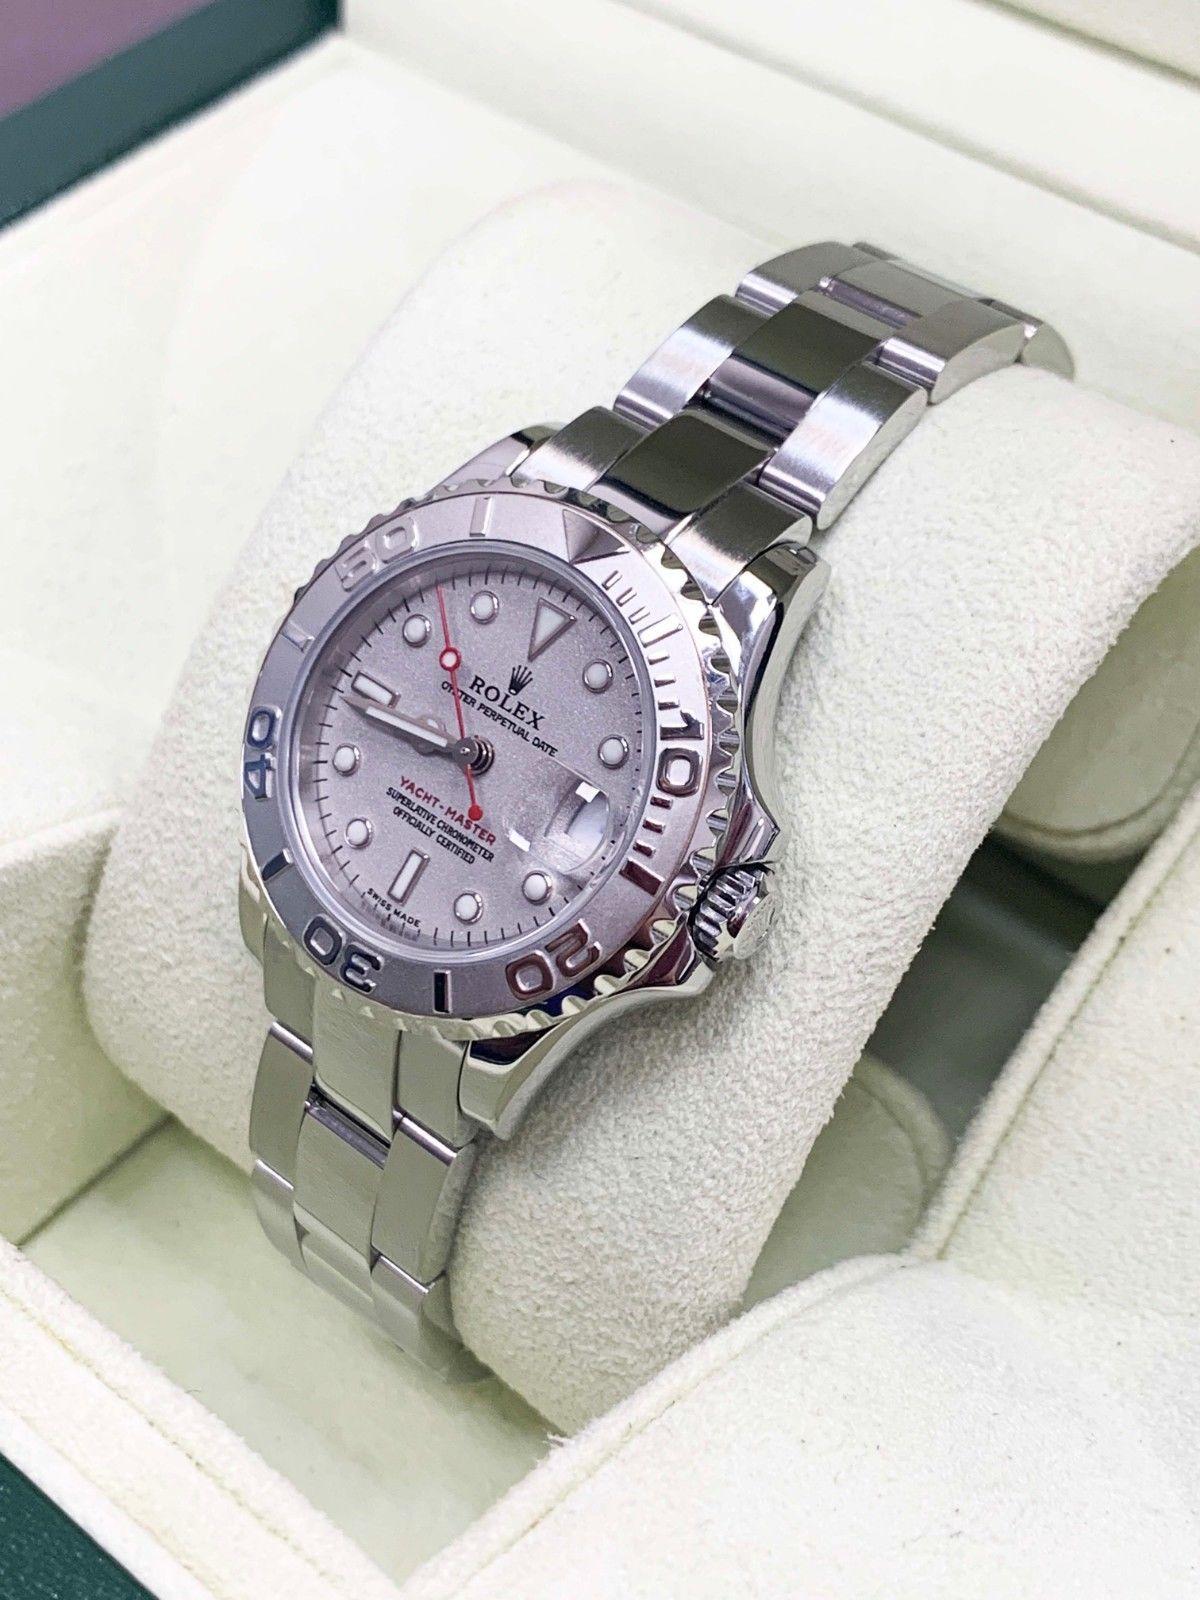 Style Number: 169622
Serial: D931***
Year: 2006
Model: Yacht Master 
Case Material: Stainless Steel 
Band: Stainless Steel
Bezel: Platinum 
Dial: Silver
Face: Sapphire Crystal 
Case Size: 29mm
Includes: 
-Rolex Box & Papers
-Certified Appraisal 
-6